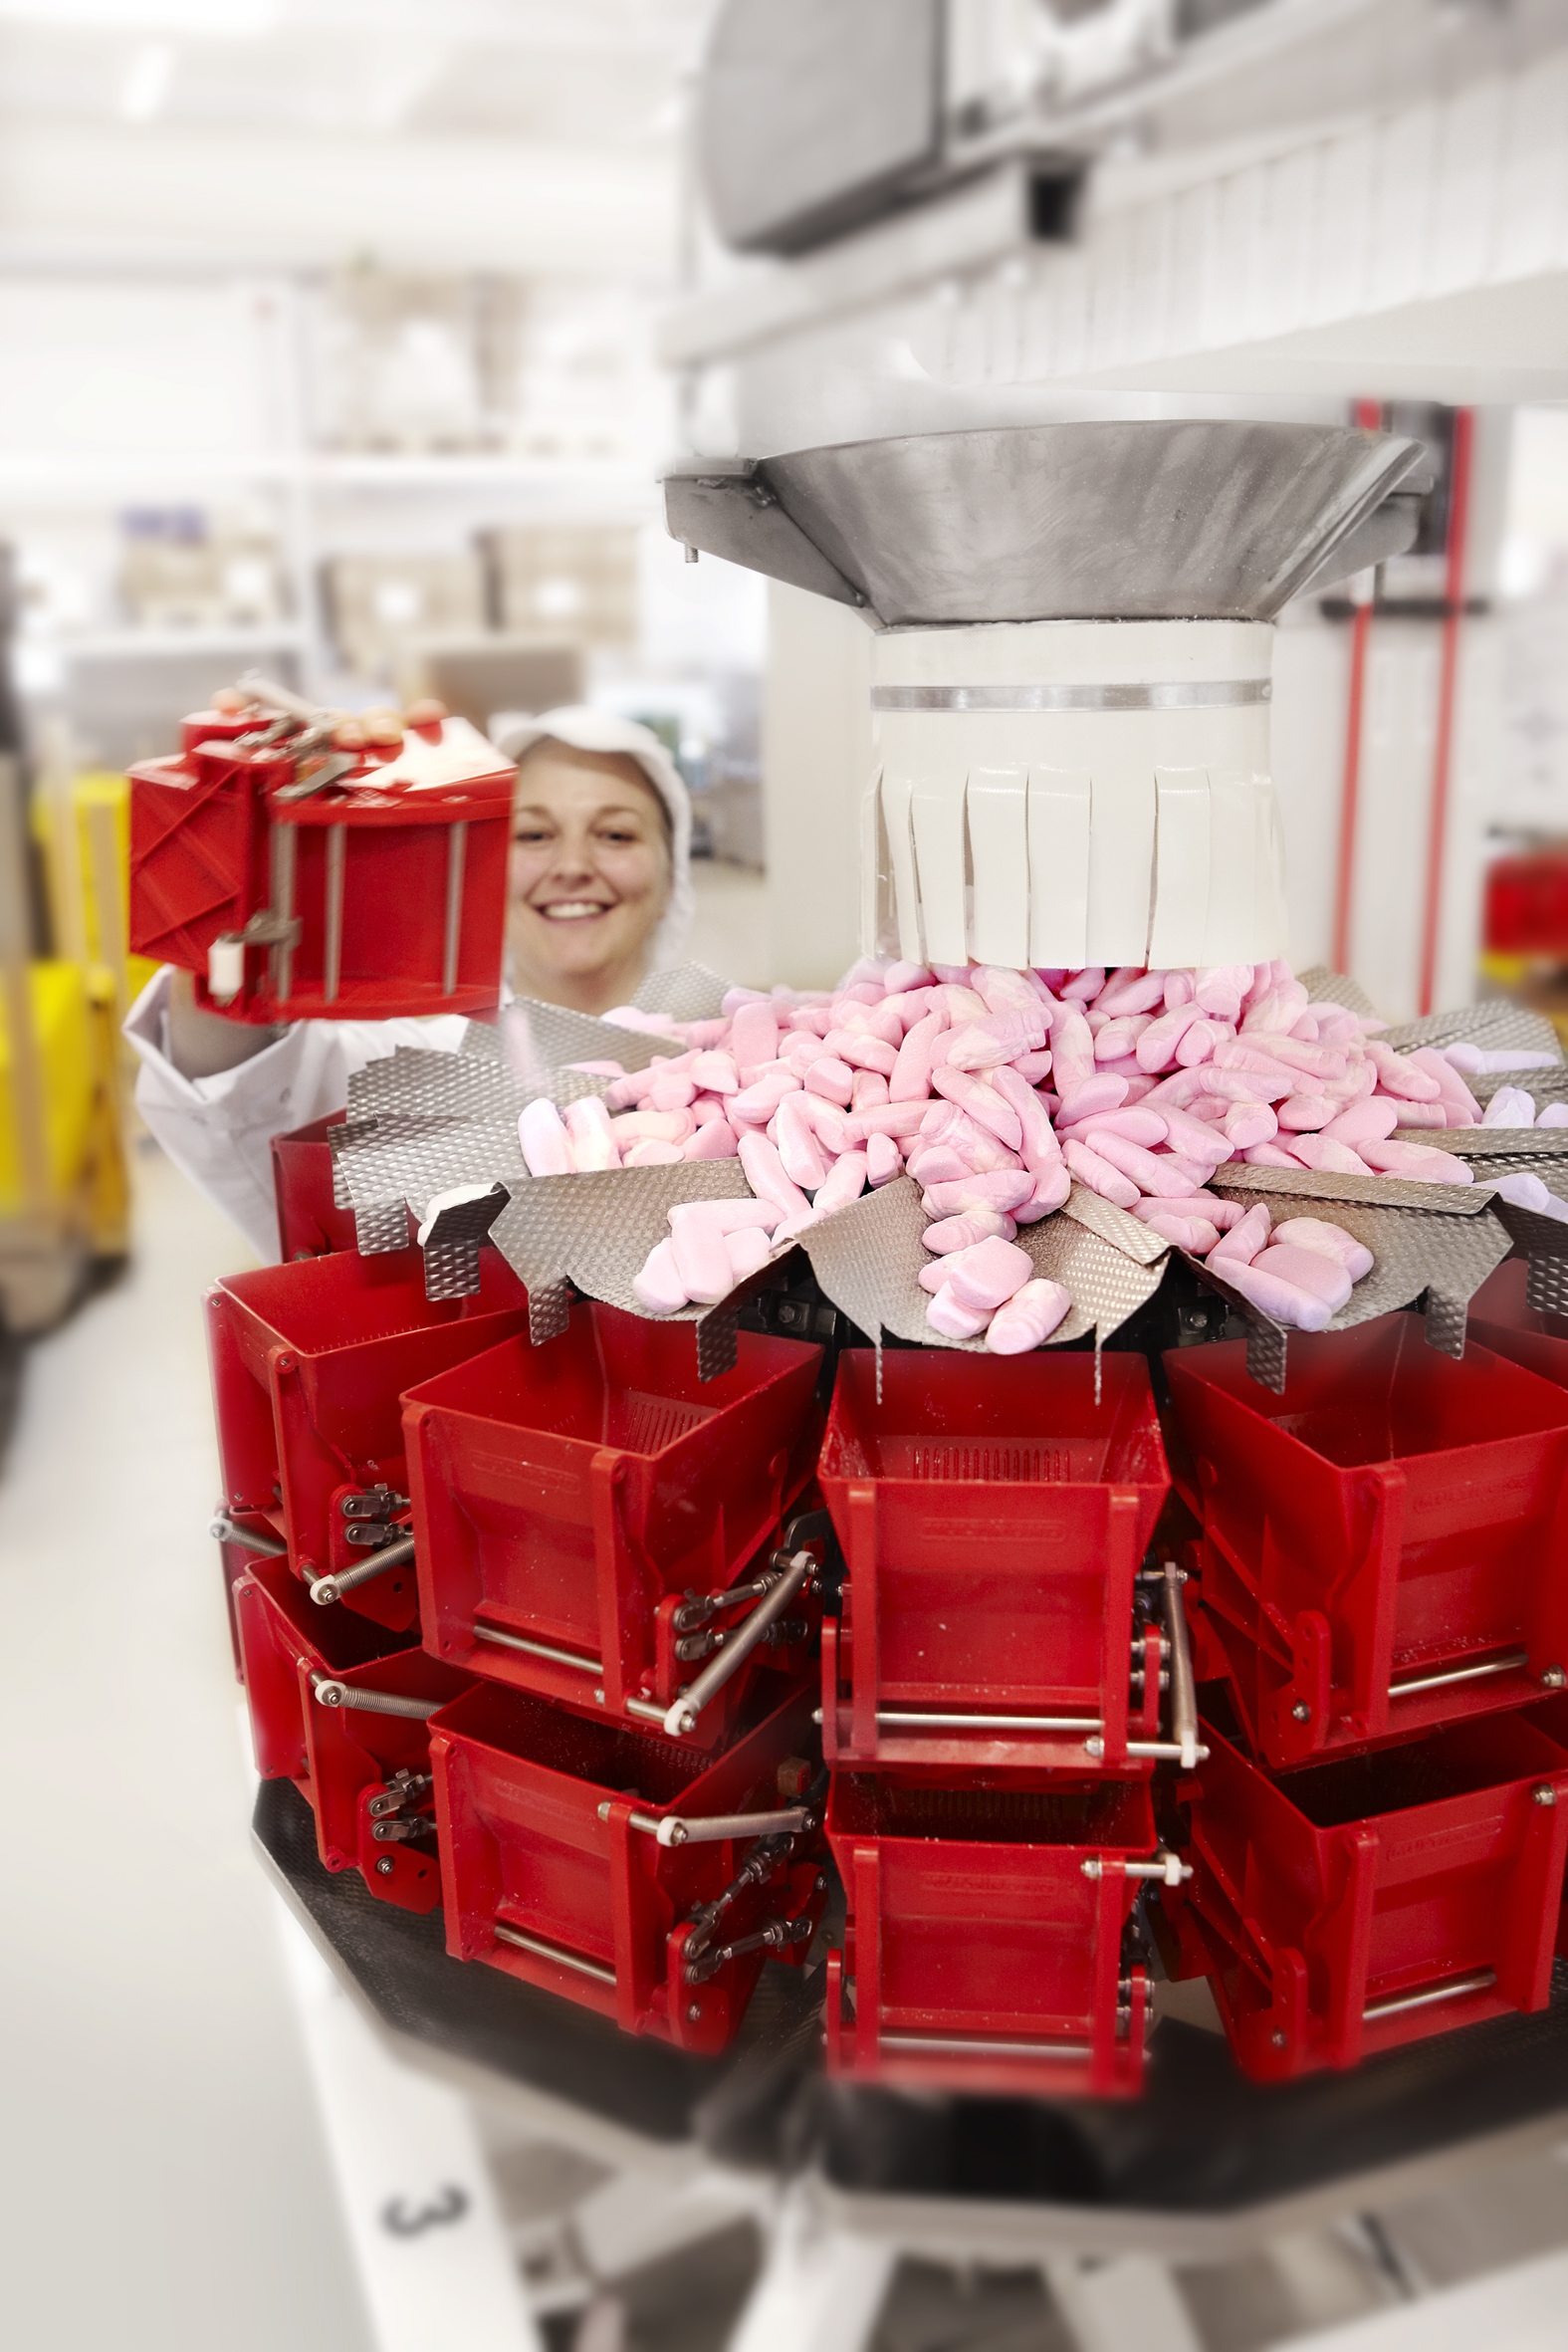 photo of candy being sorted at a factory